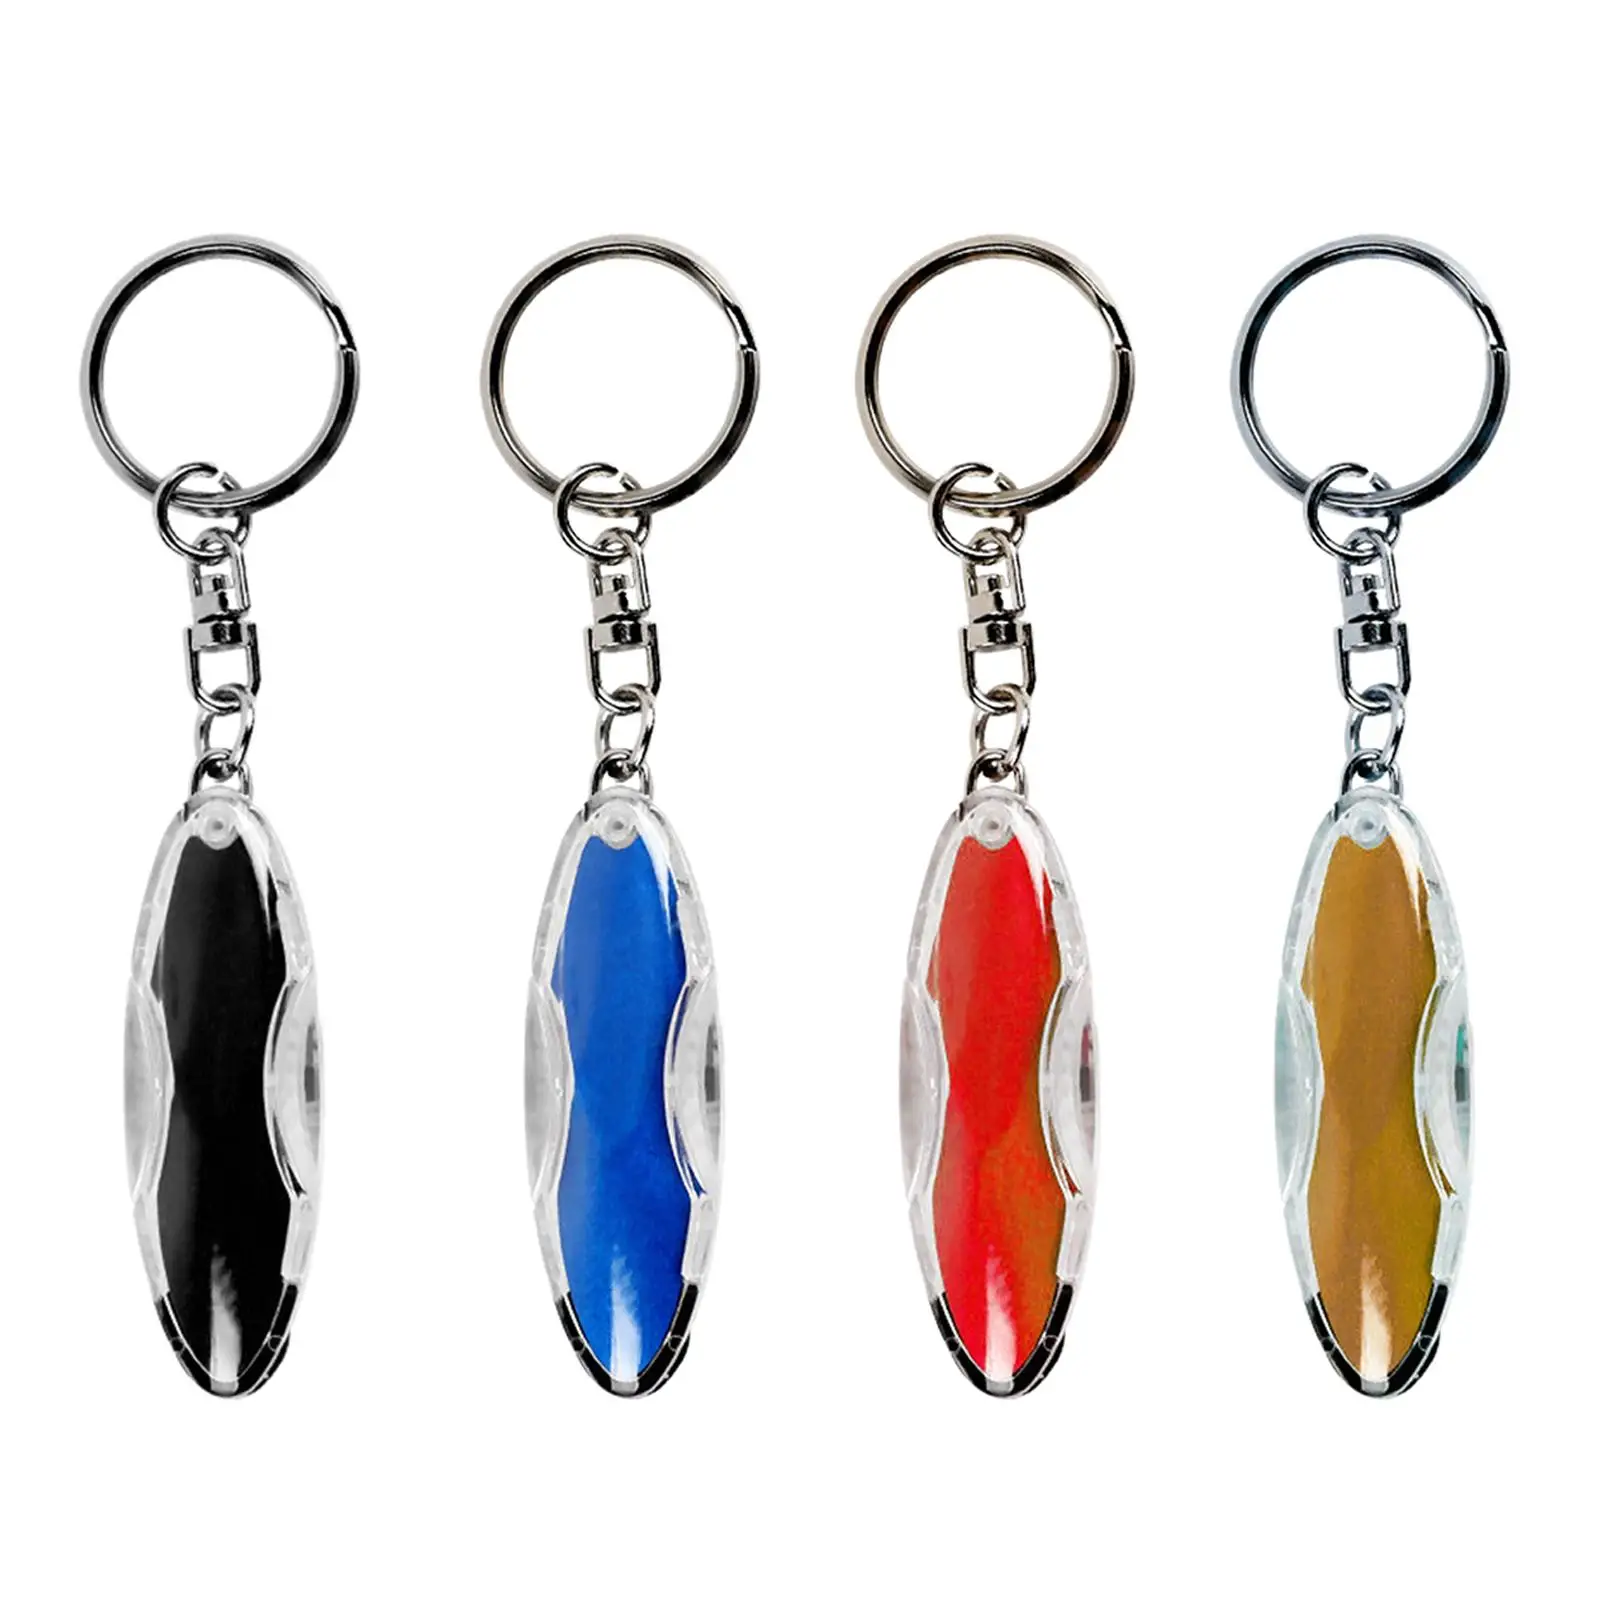 Portable Mini Anti Static Keychain, Keyring Human Body Car Static Car Static Discharge Remover Releaser for Auto